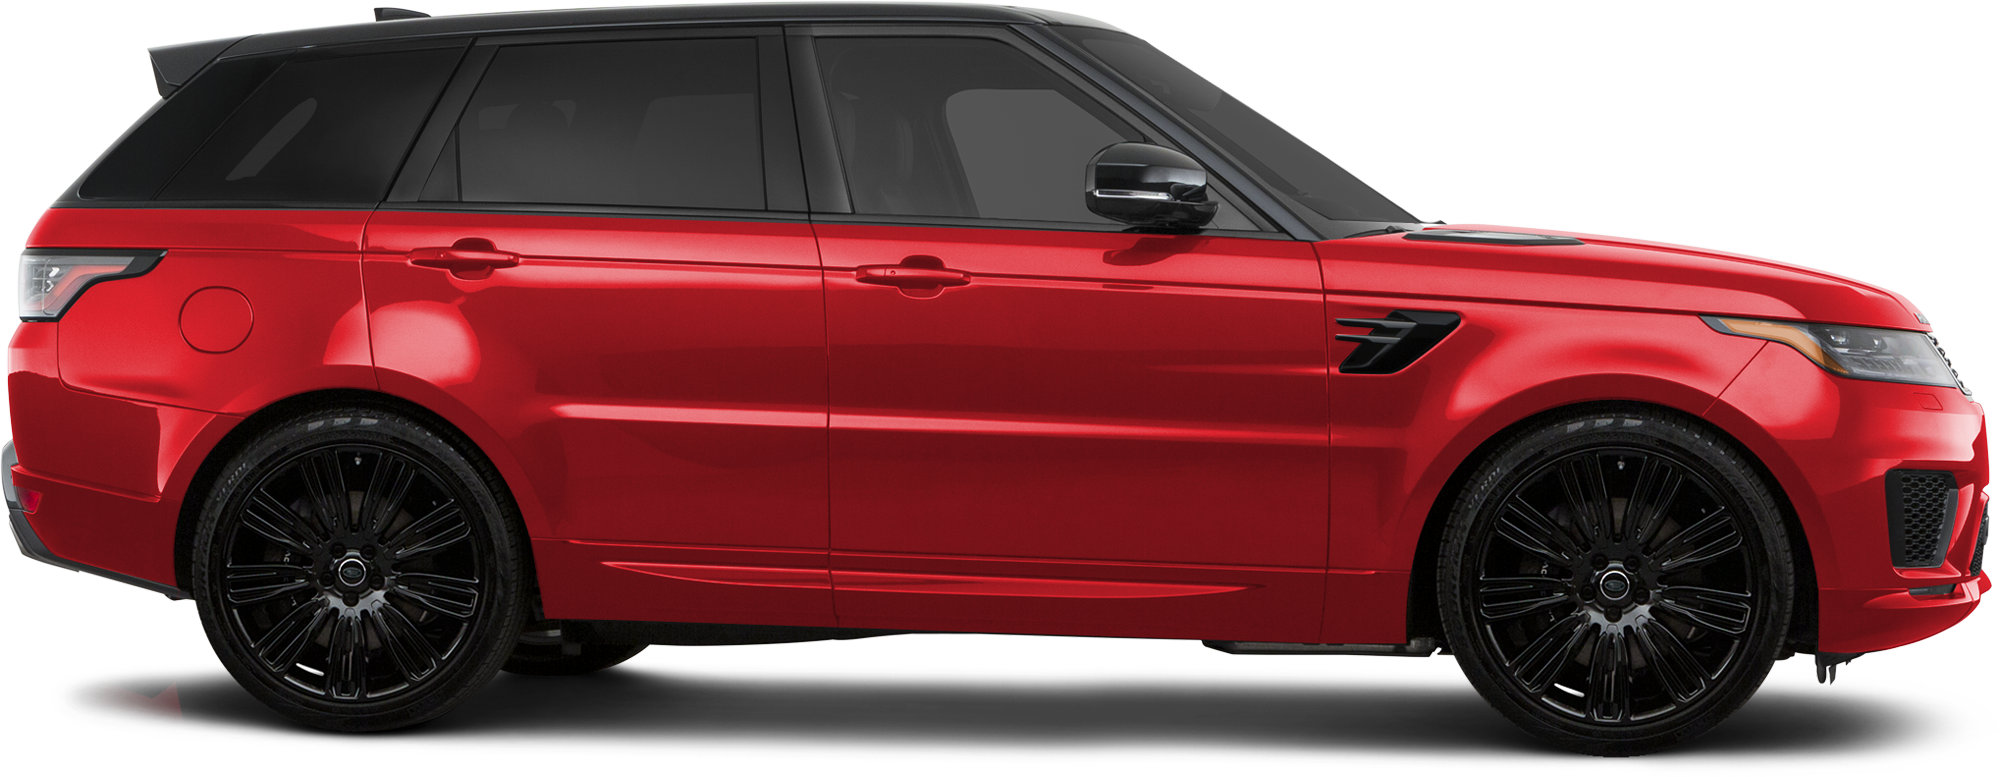 2022 Land Rover Range Rover Sport Incentives, Specials & Offers in Lakeland  FL